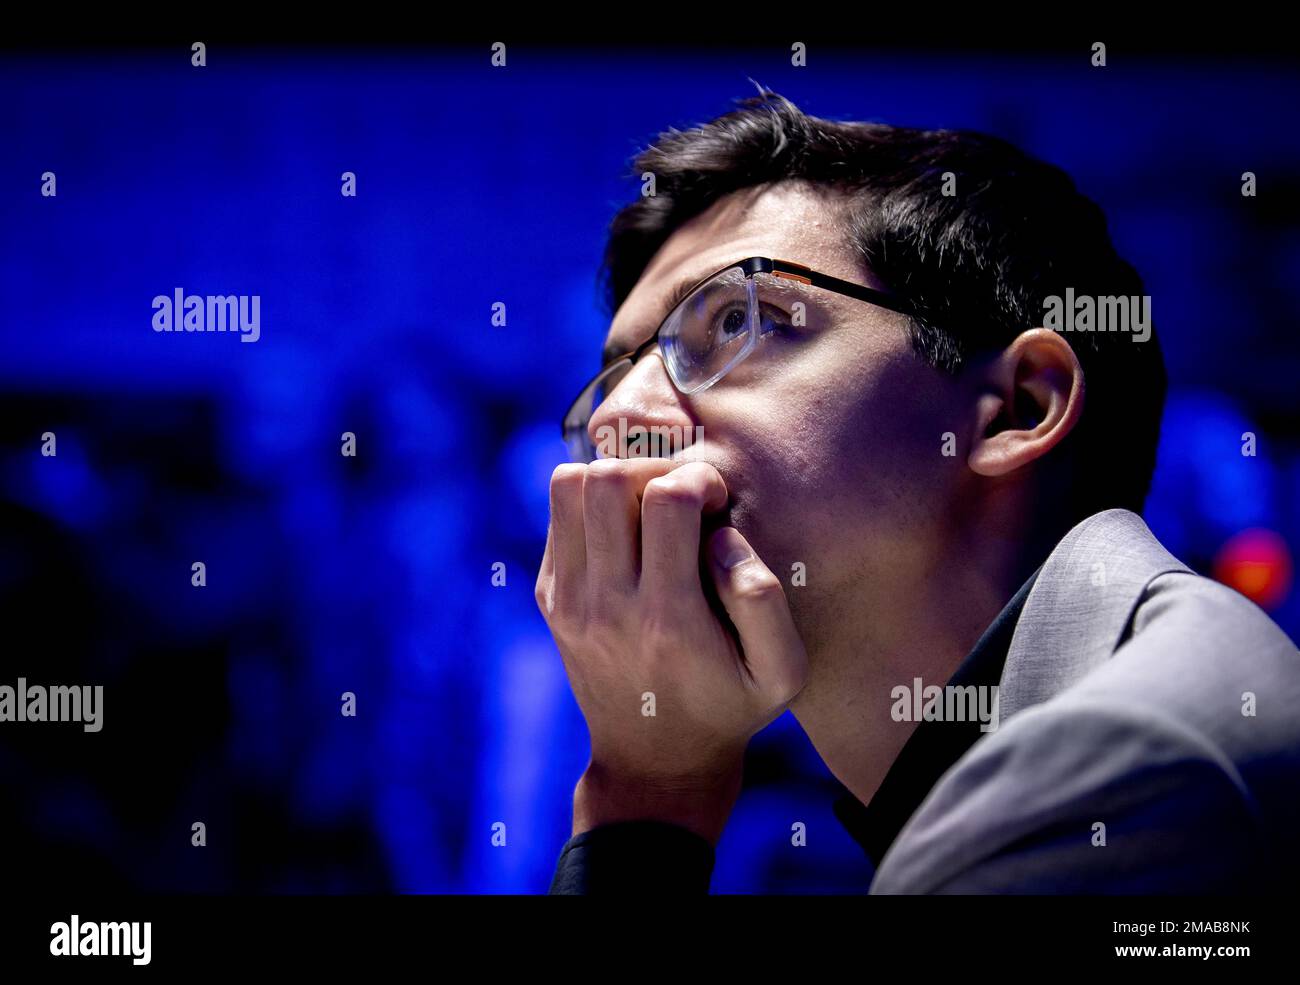 AMSTERDAM - Anish Giri during the fifth round of the Tata Steel Masters chess tournament. This round of the chess tournament will be played in the Johan Cruijf ArenA. ANP KOEN VAN WEEL netherlands out - belgium out Stock Photo